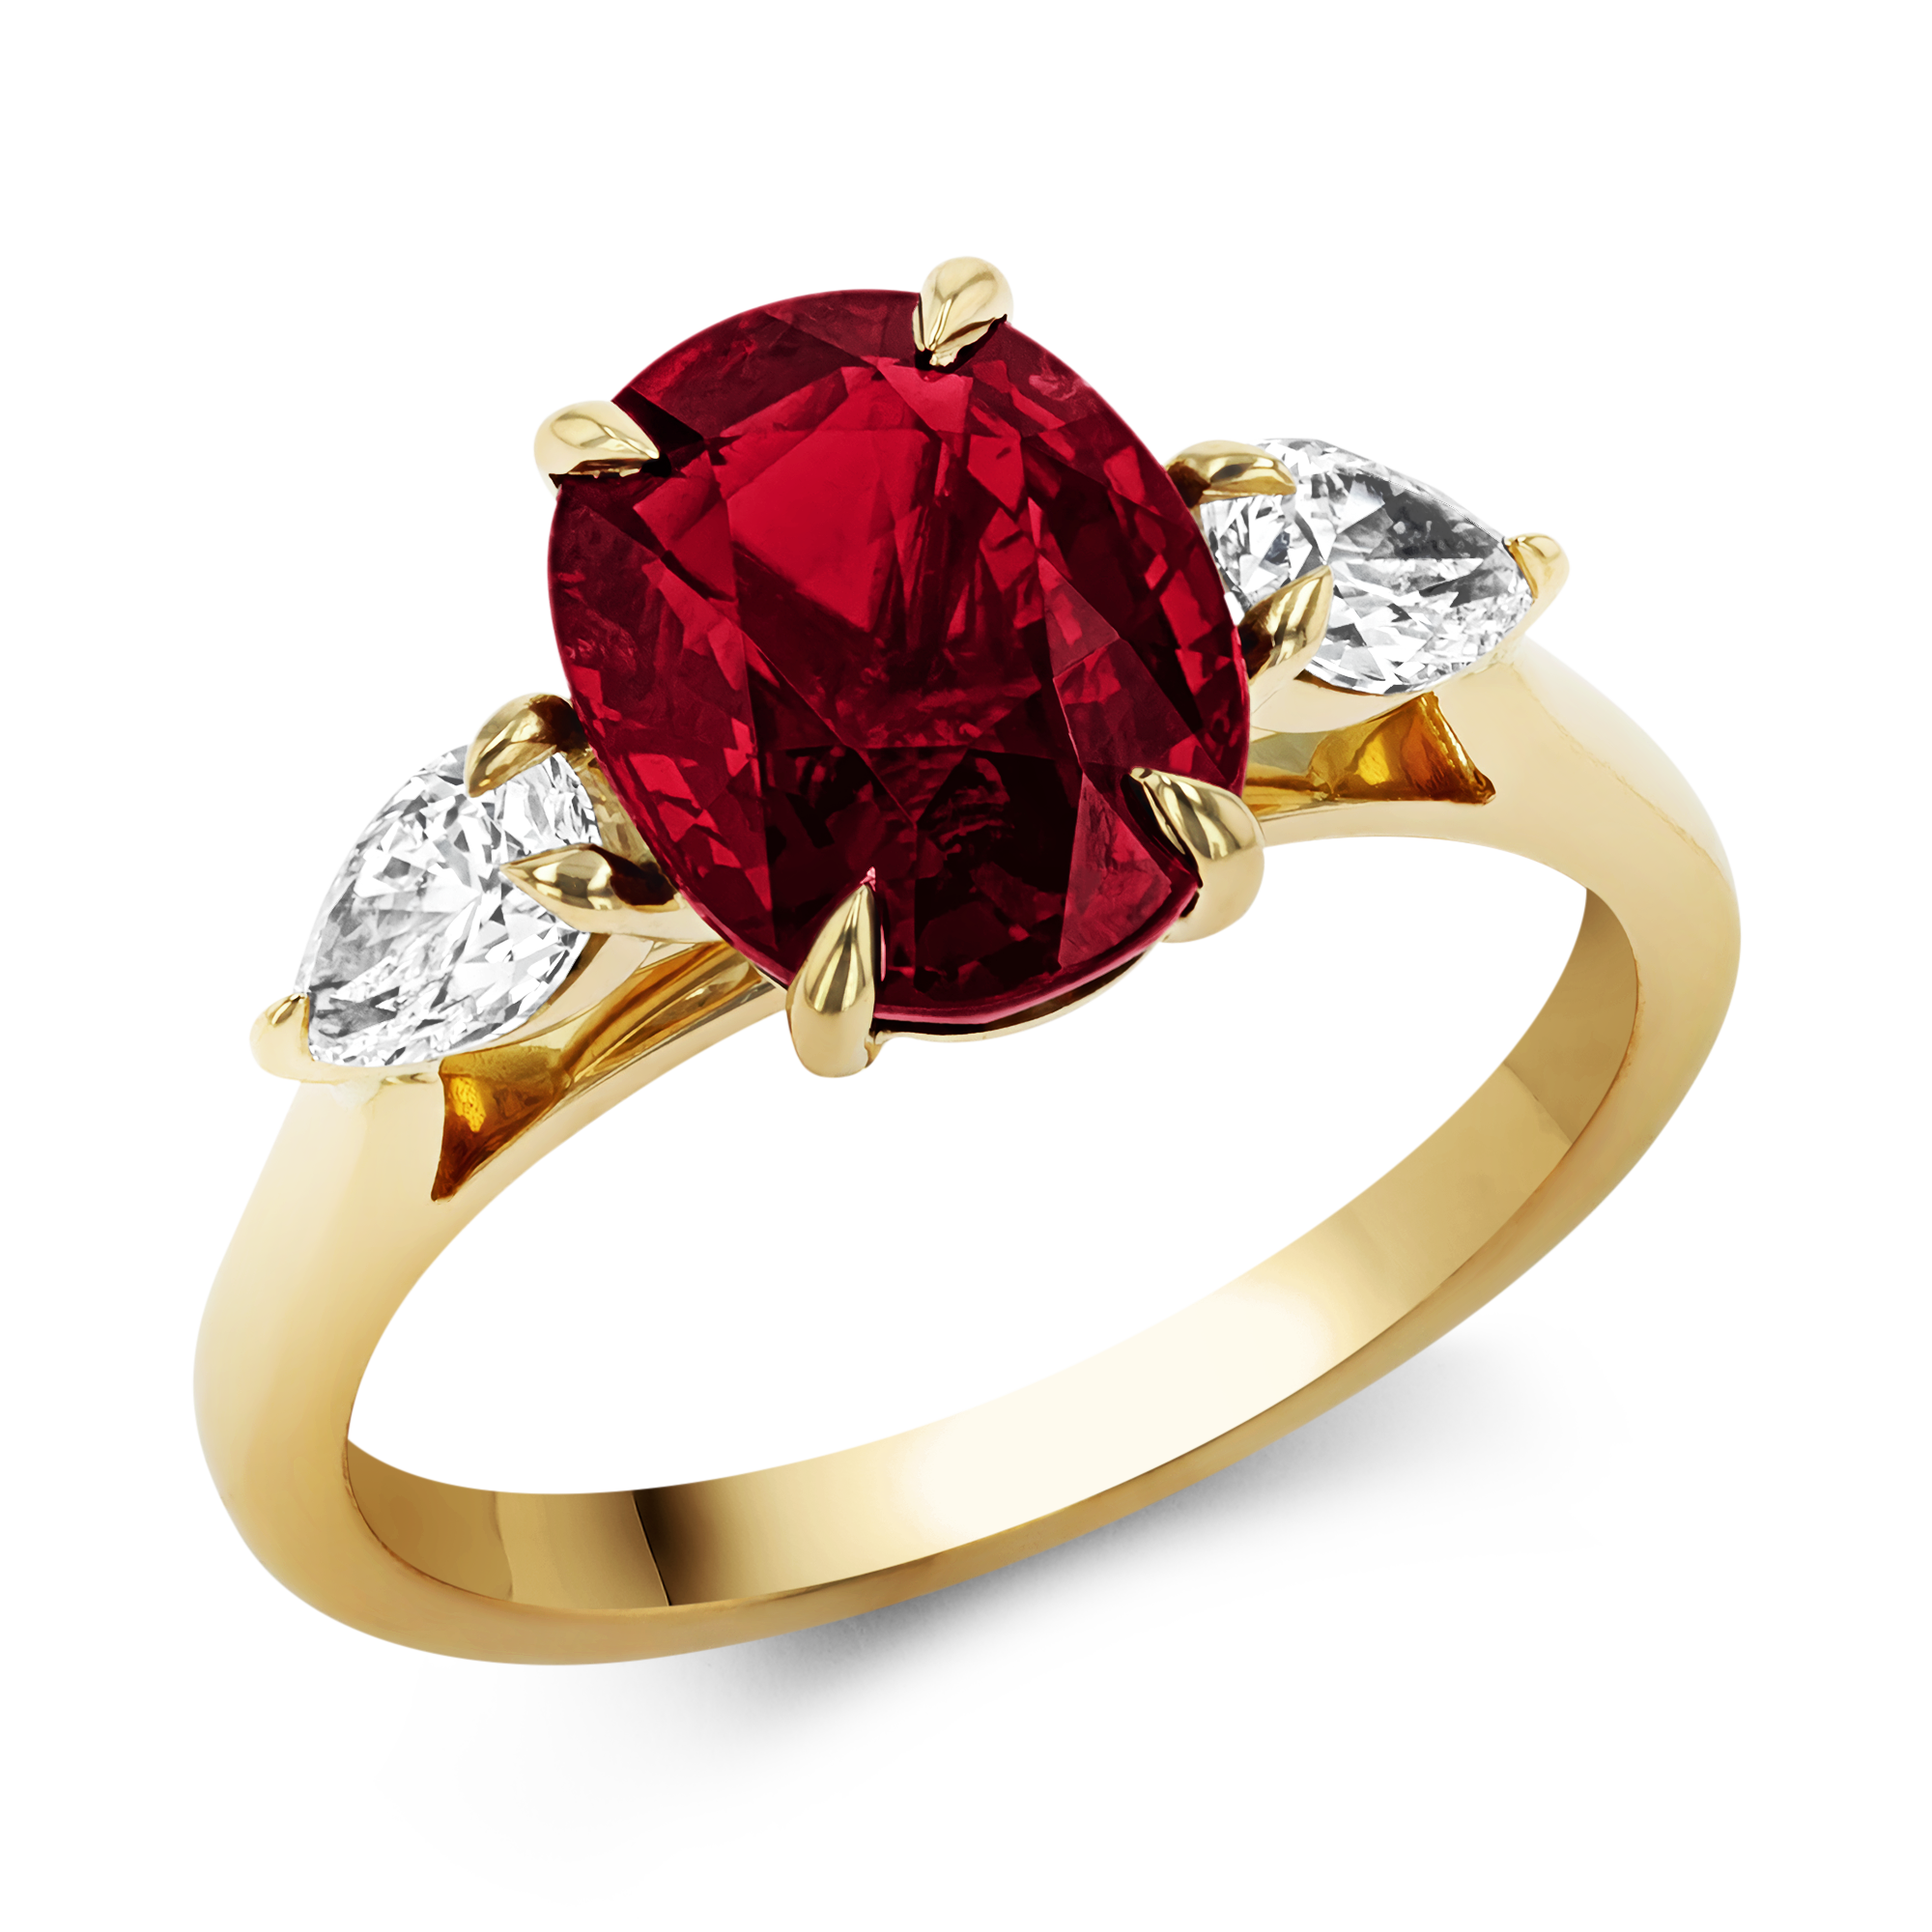 Mozambique 3.03ct Ruby and Diamond Three Stone Ring Oval Cut, Claw Set_1